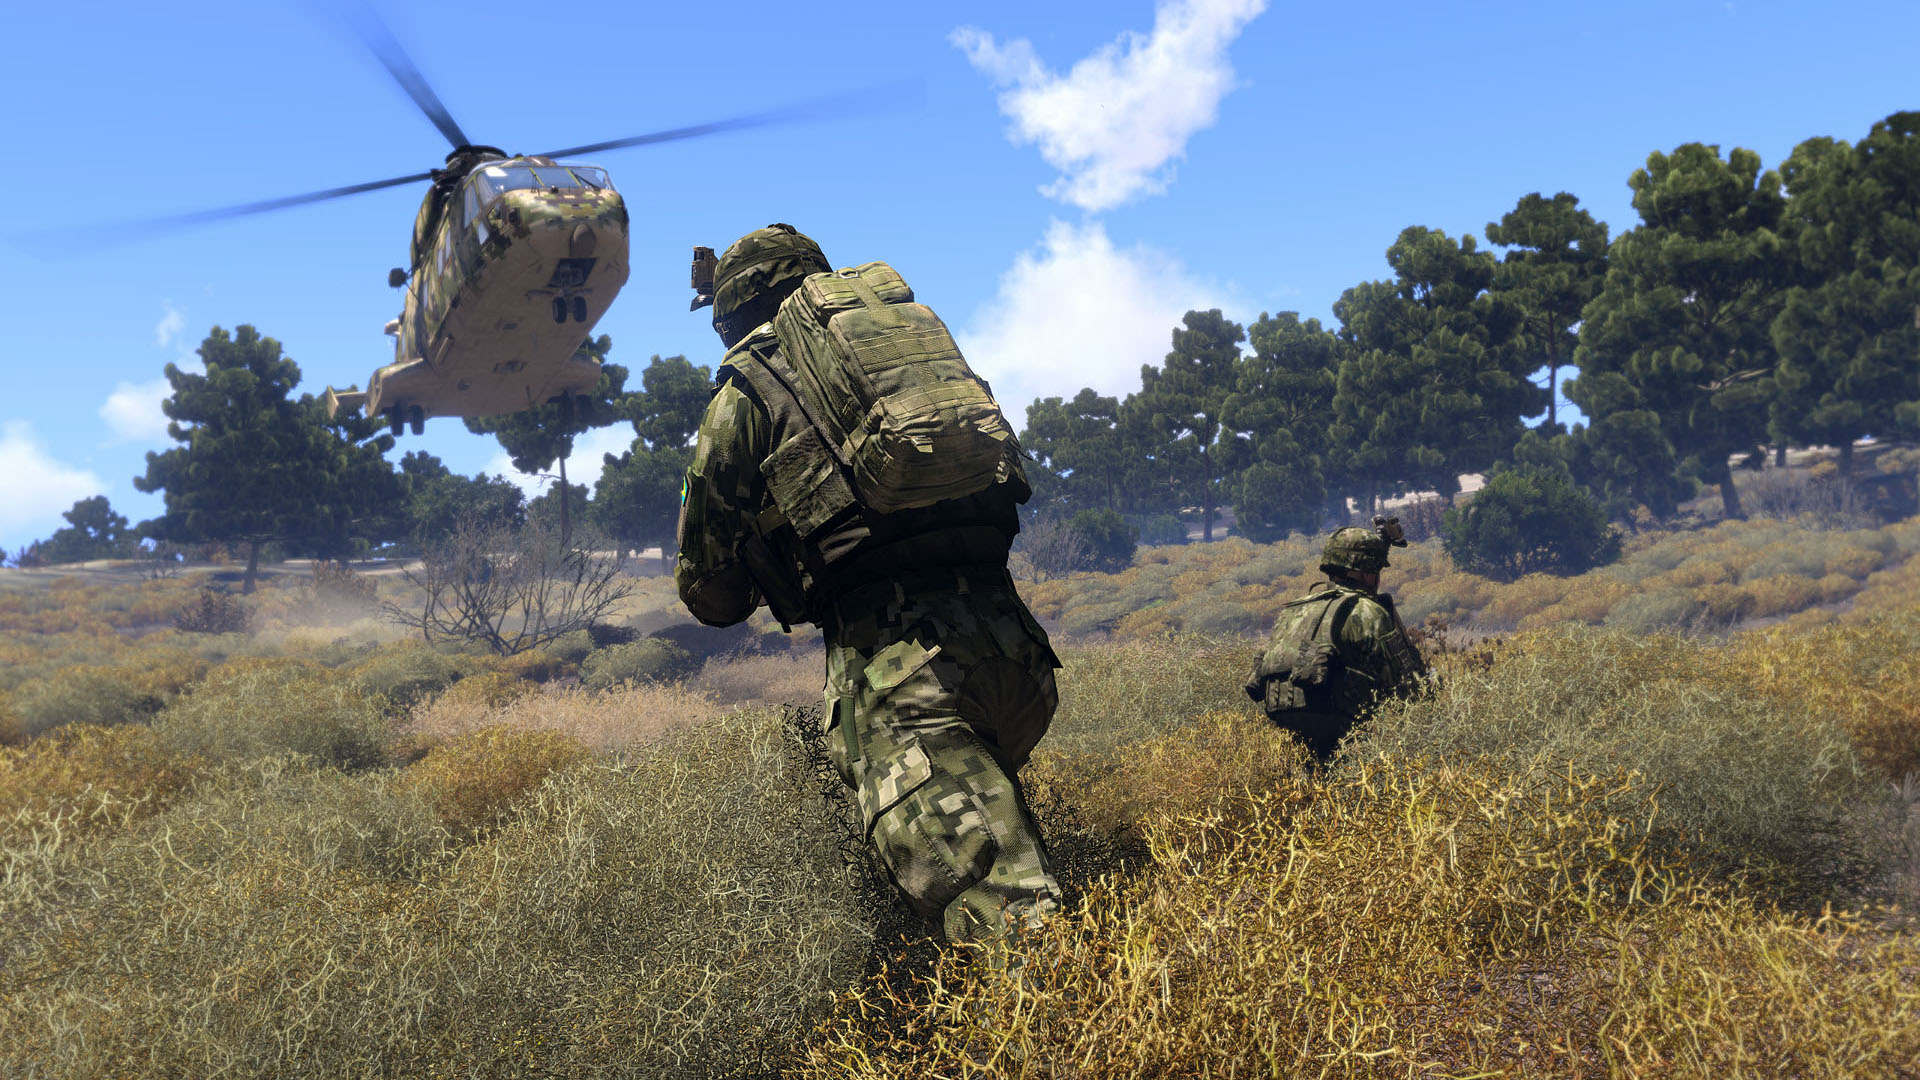 Best simulation games: Arma 3. Image shows soldiers and a helicopter in the battlefield.